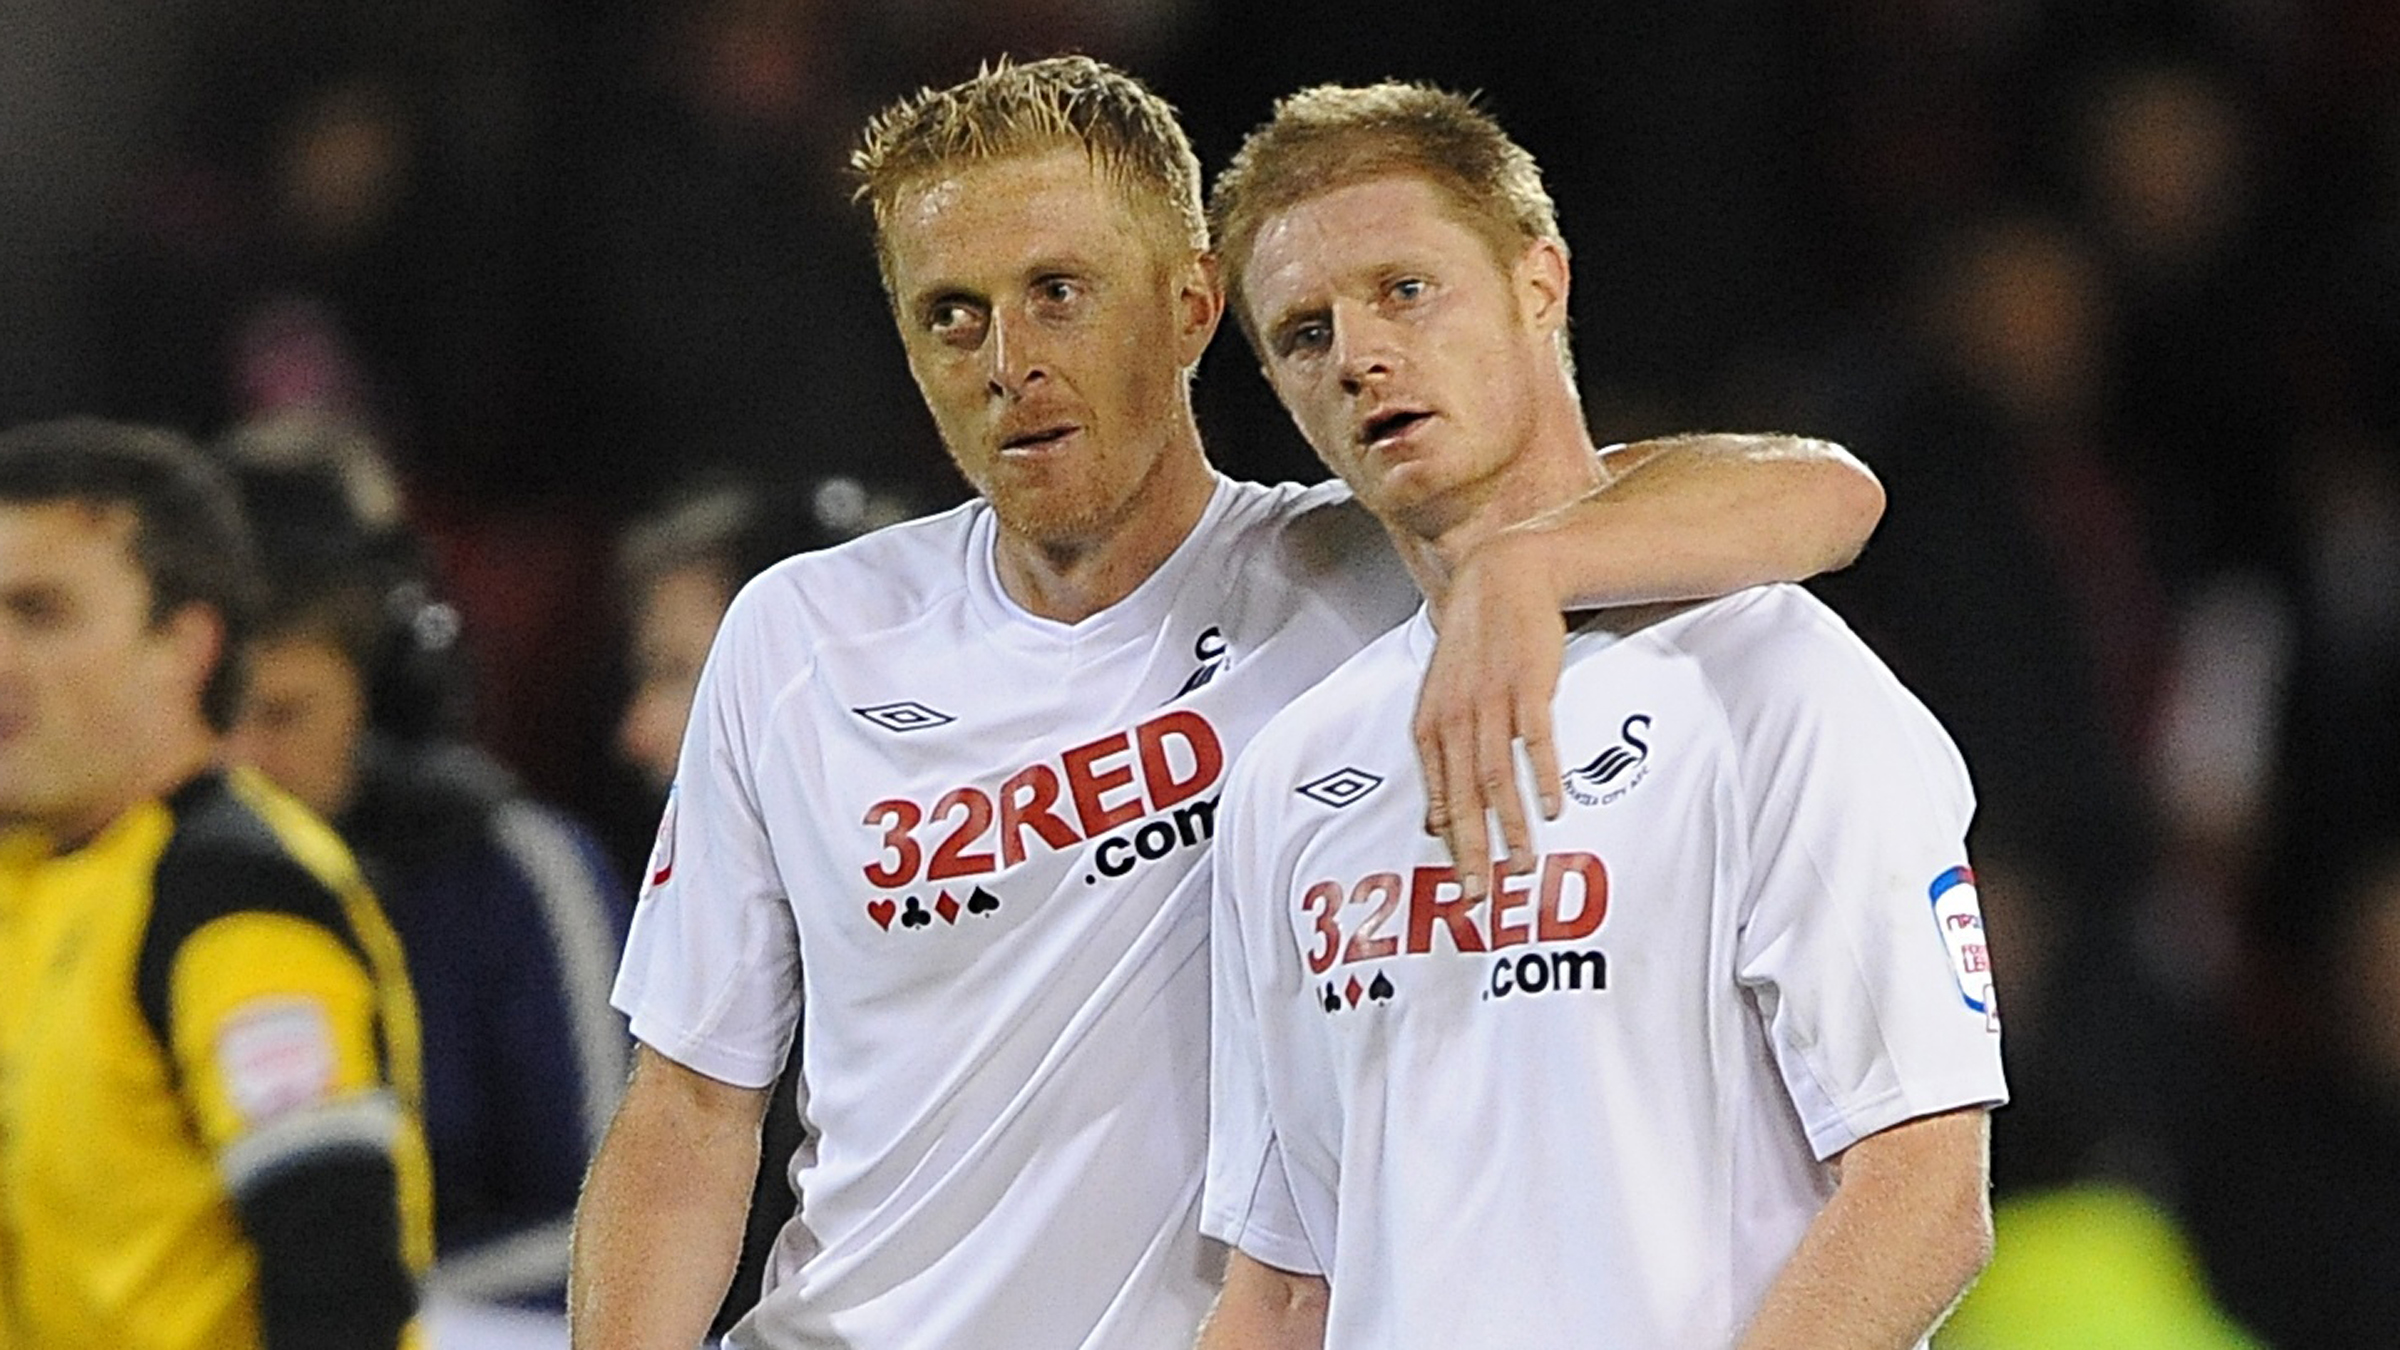 Throwback, Swansea City v Nottingham Forest, 2010-11 Play-off highlights